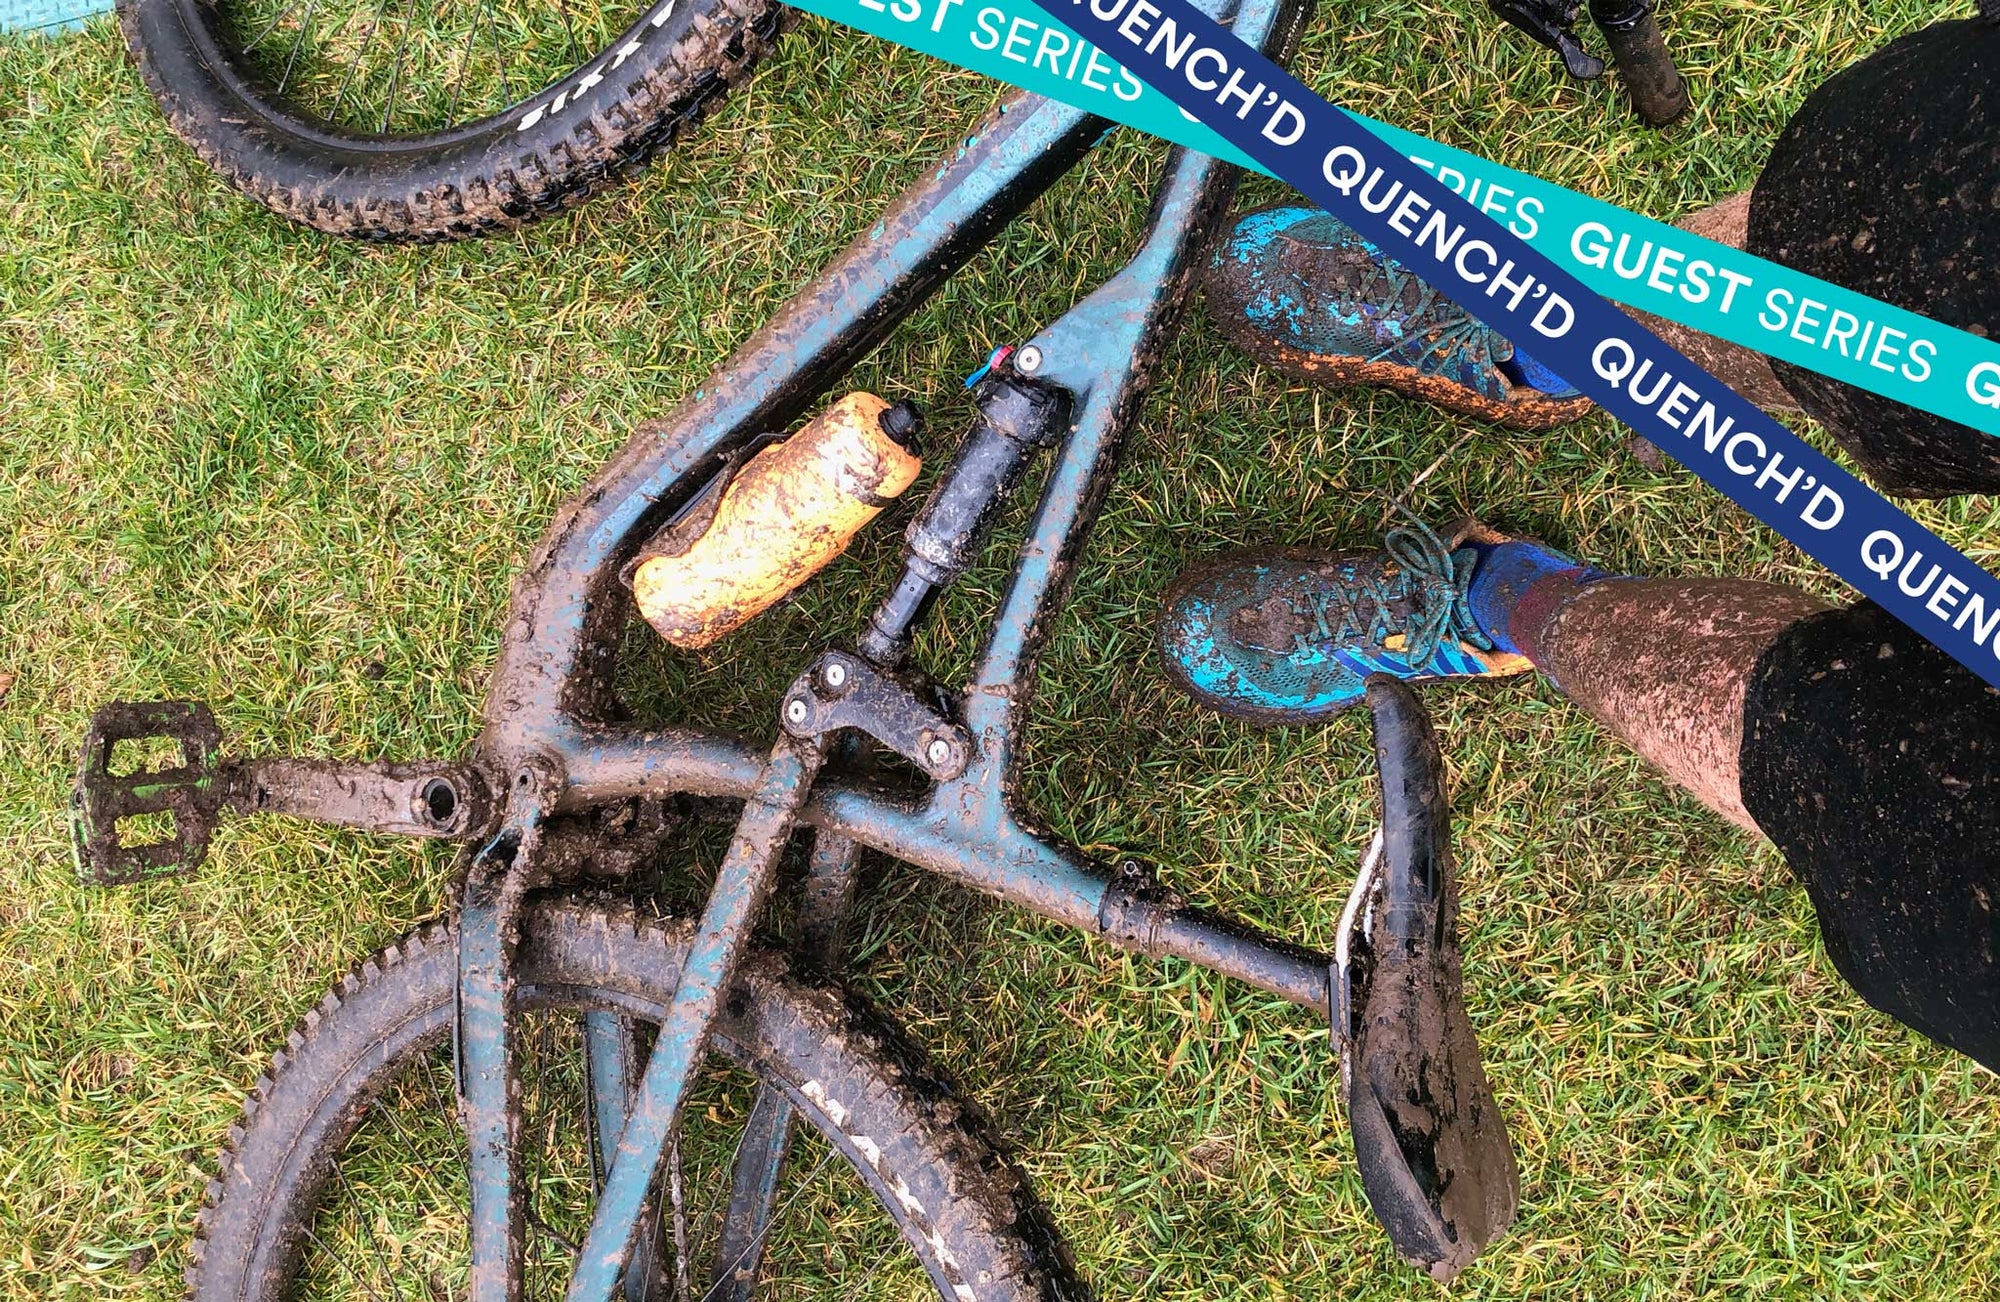 Quench'd: Mountain Bikers, Don’t Get Stuck in a Rut